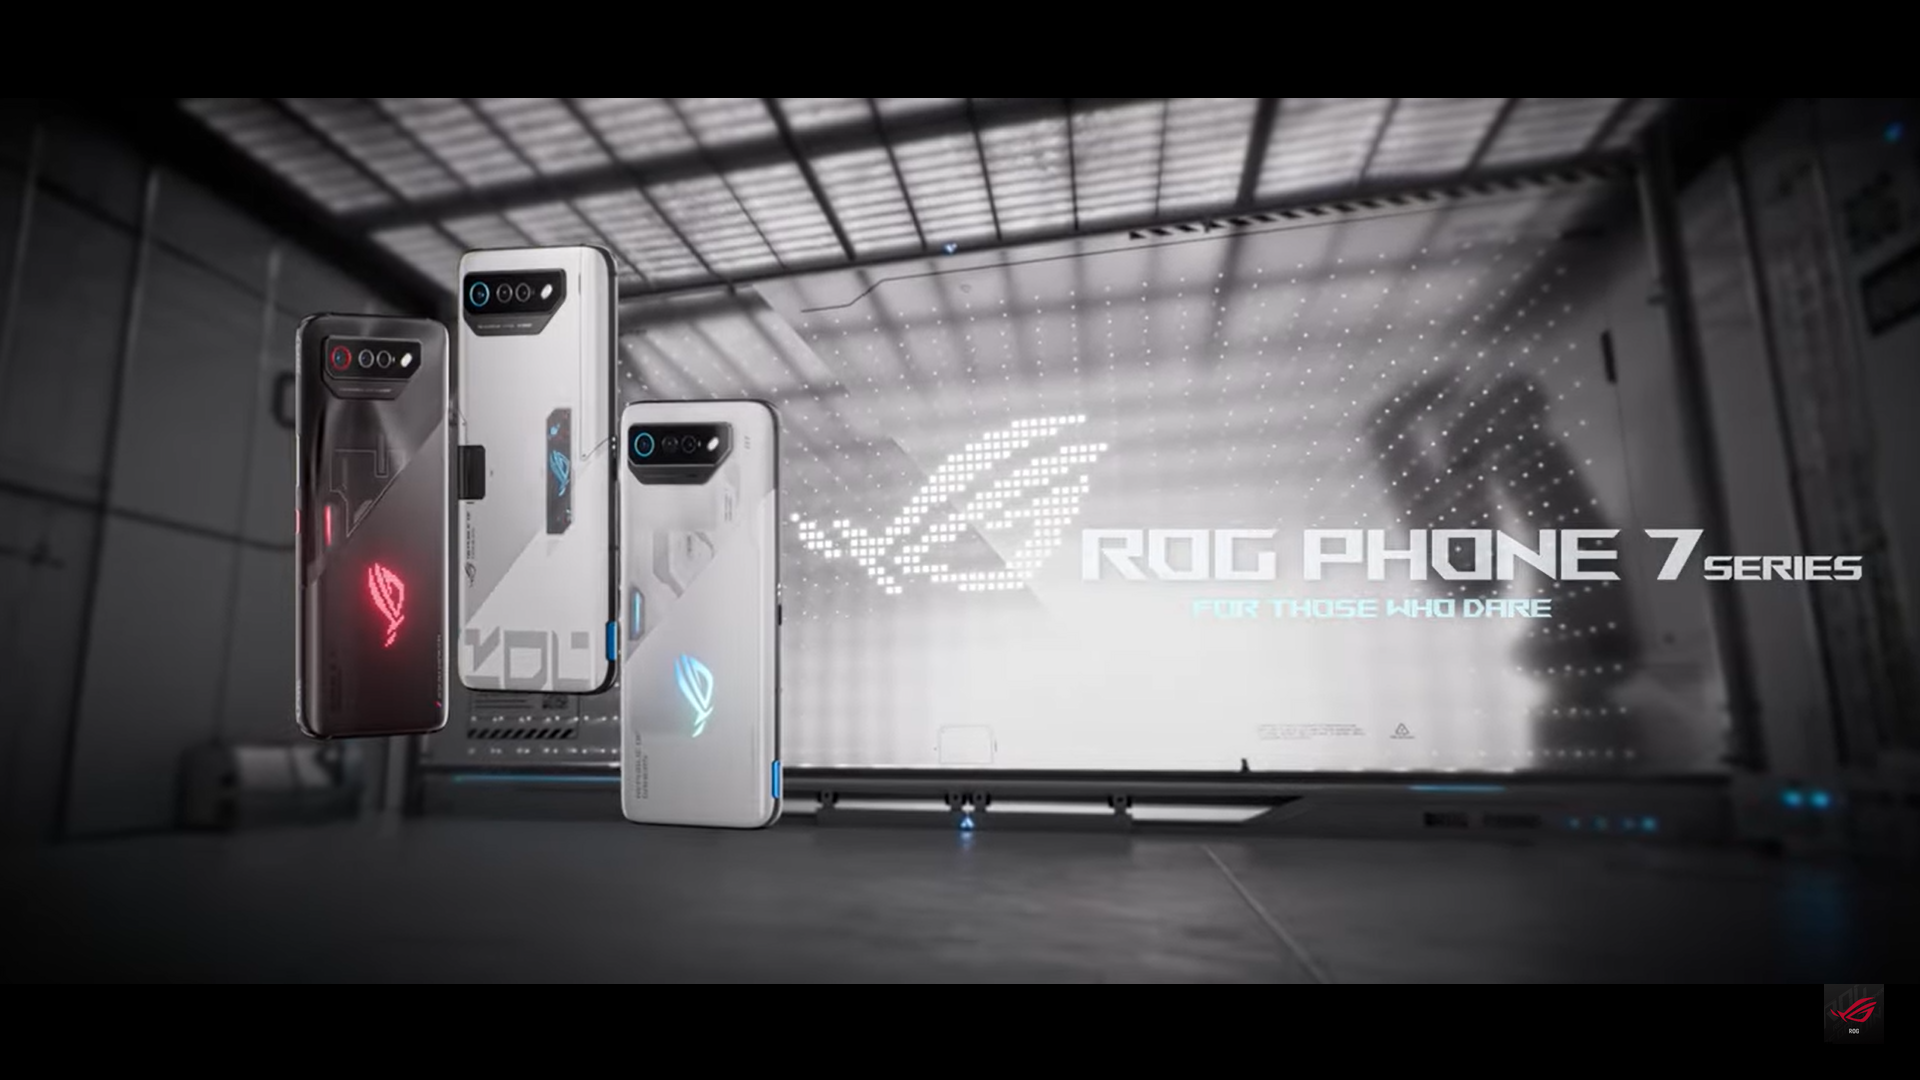 ASUS ROG PHONE 7 ULTIMATE Specifications & Price Nigeriantech.com.ng